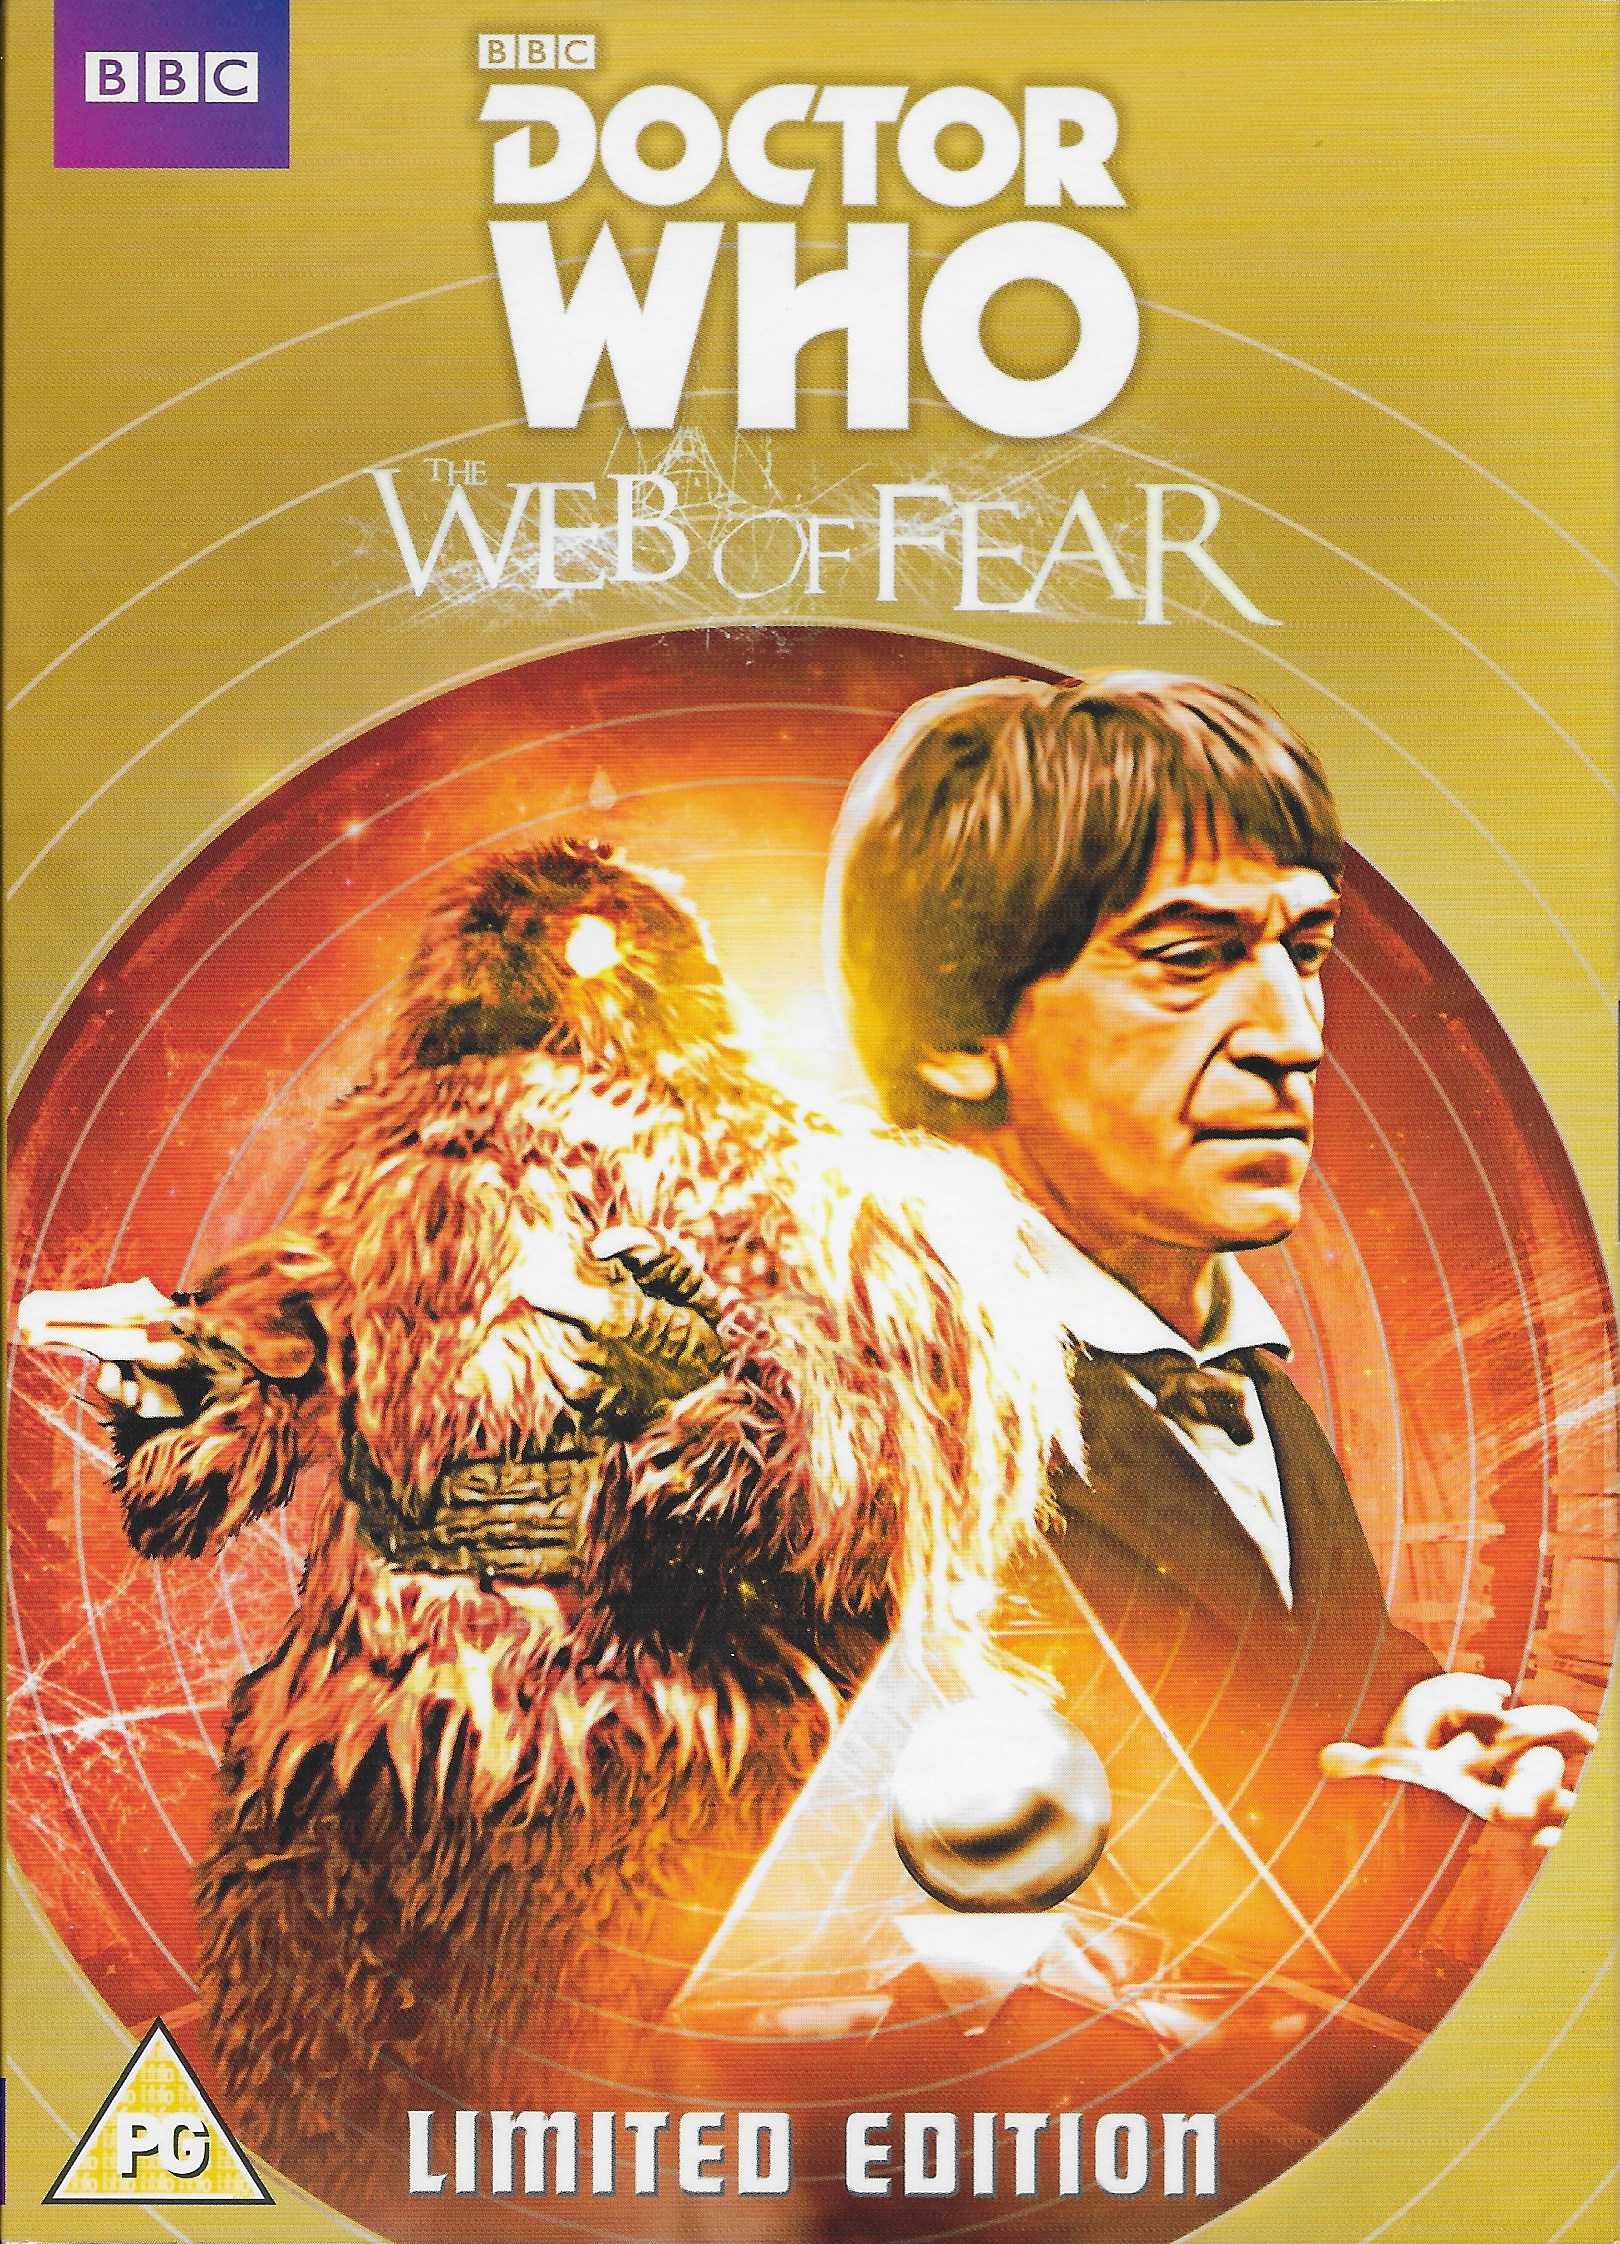 Picture of BBCDVD 3867 Doctor Who - The web of fear by artist Mervyn Haisman / Henry Lincoln from the BBC dvds - Records and Tapes library